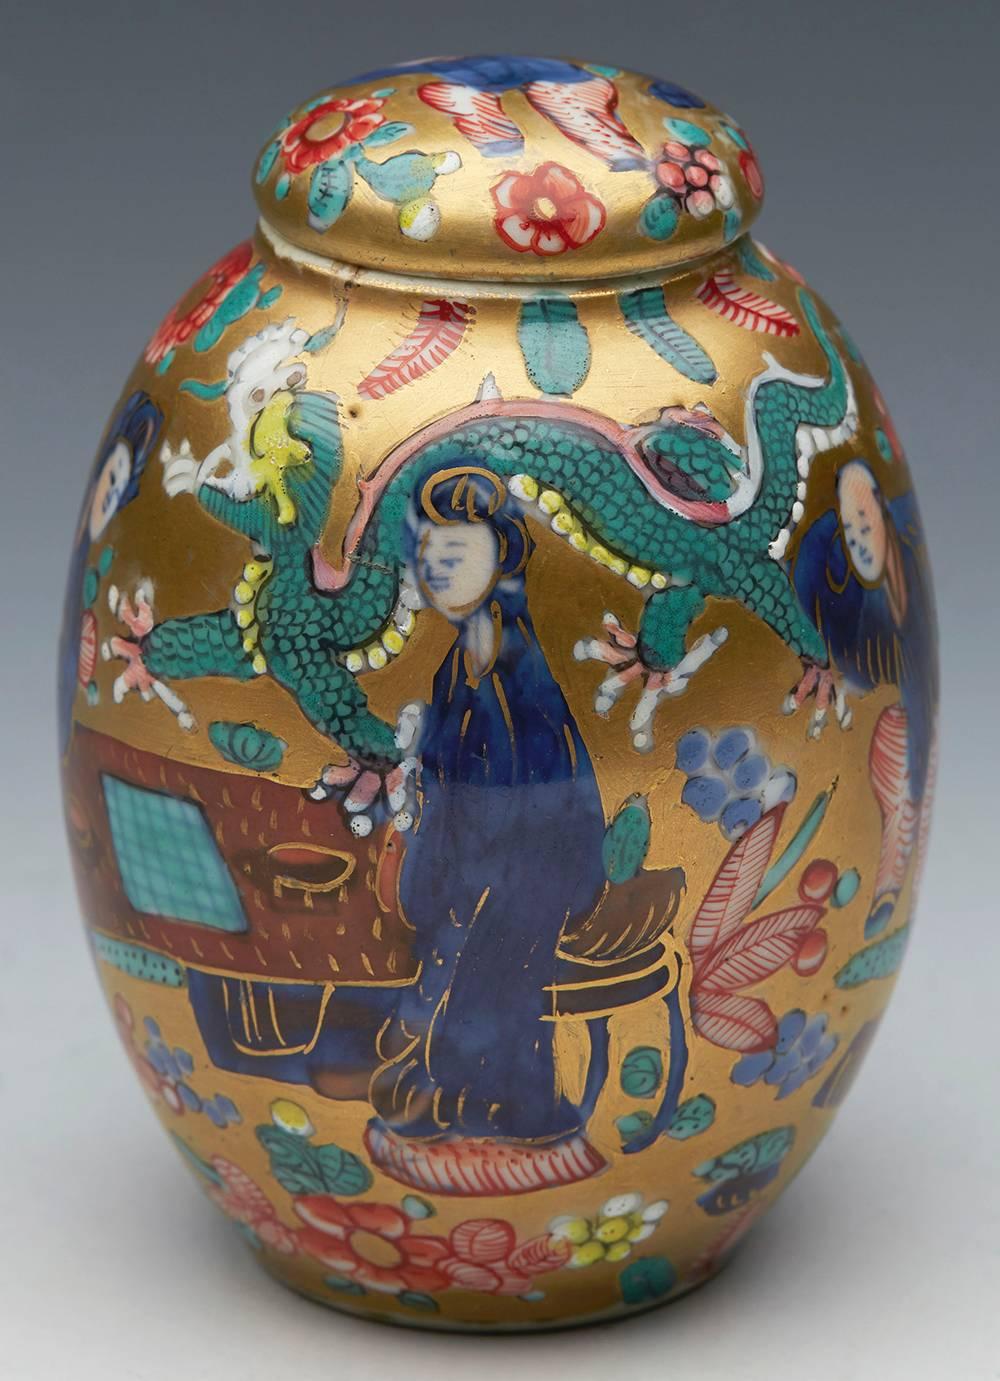 An antique Chinese Kangxi lidded jar hand-painted with two ladies playing a board game with a five claw scrolling dragon dating 1662-1722. This finely made porcelain jar stands on a narrow rounded unglazed foot rim with a recessed base. The rounded